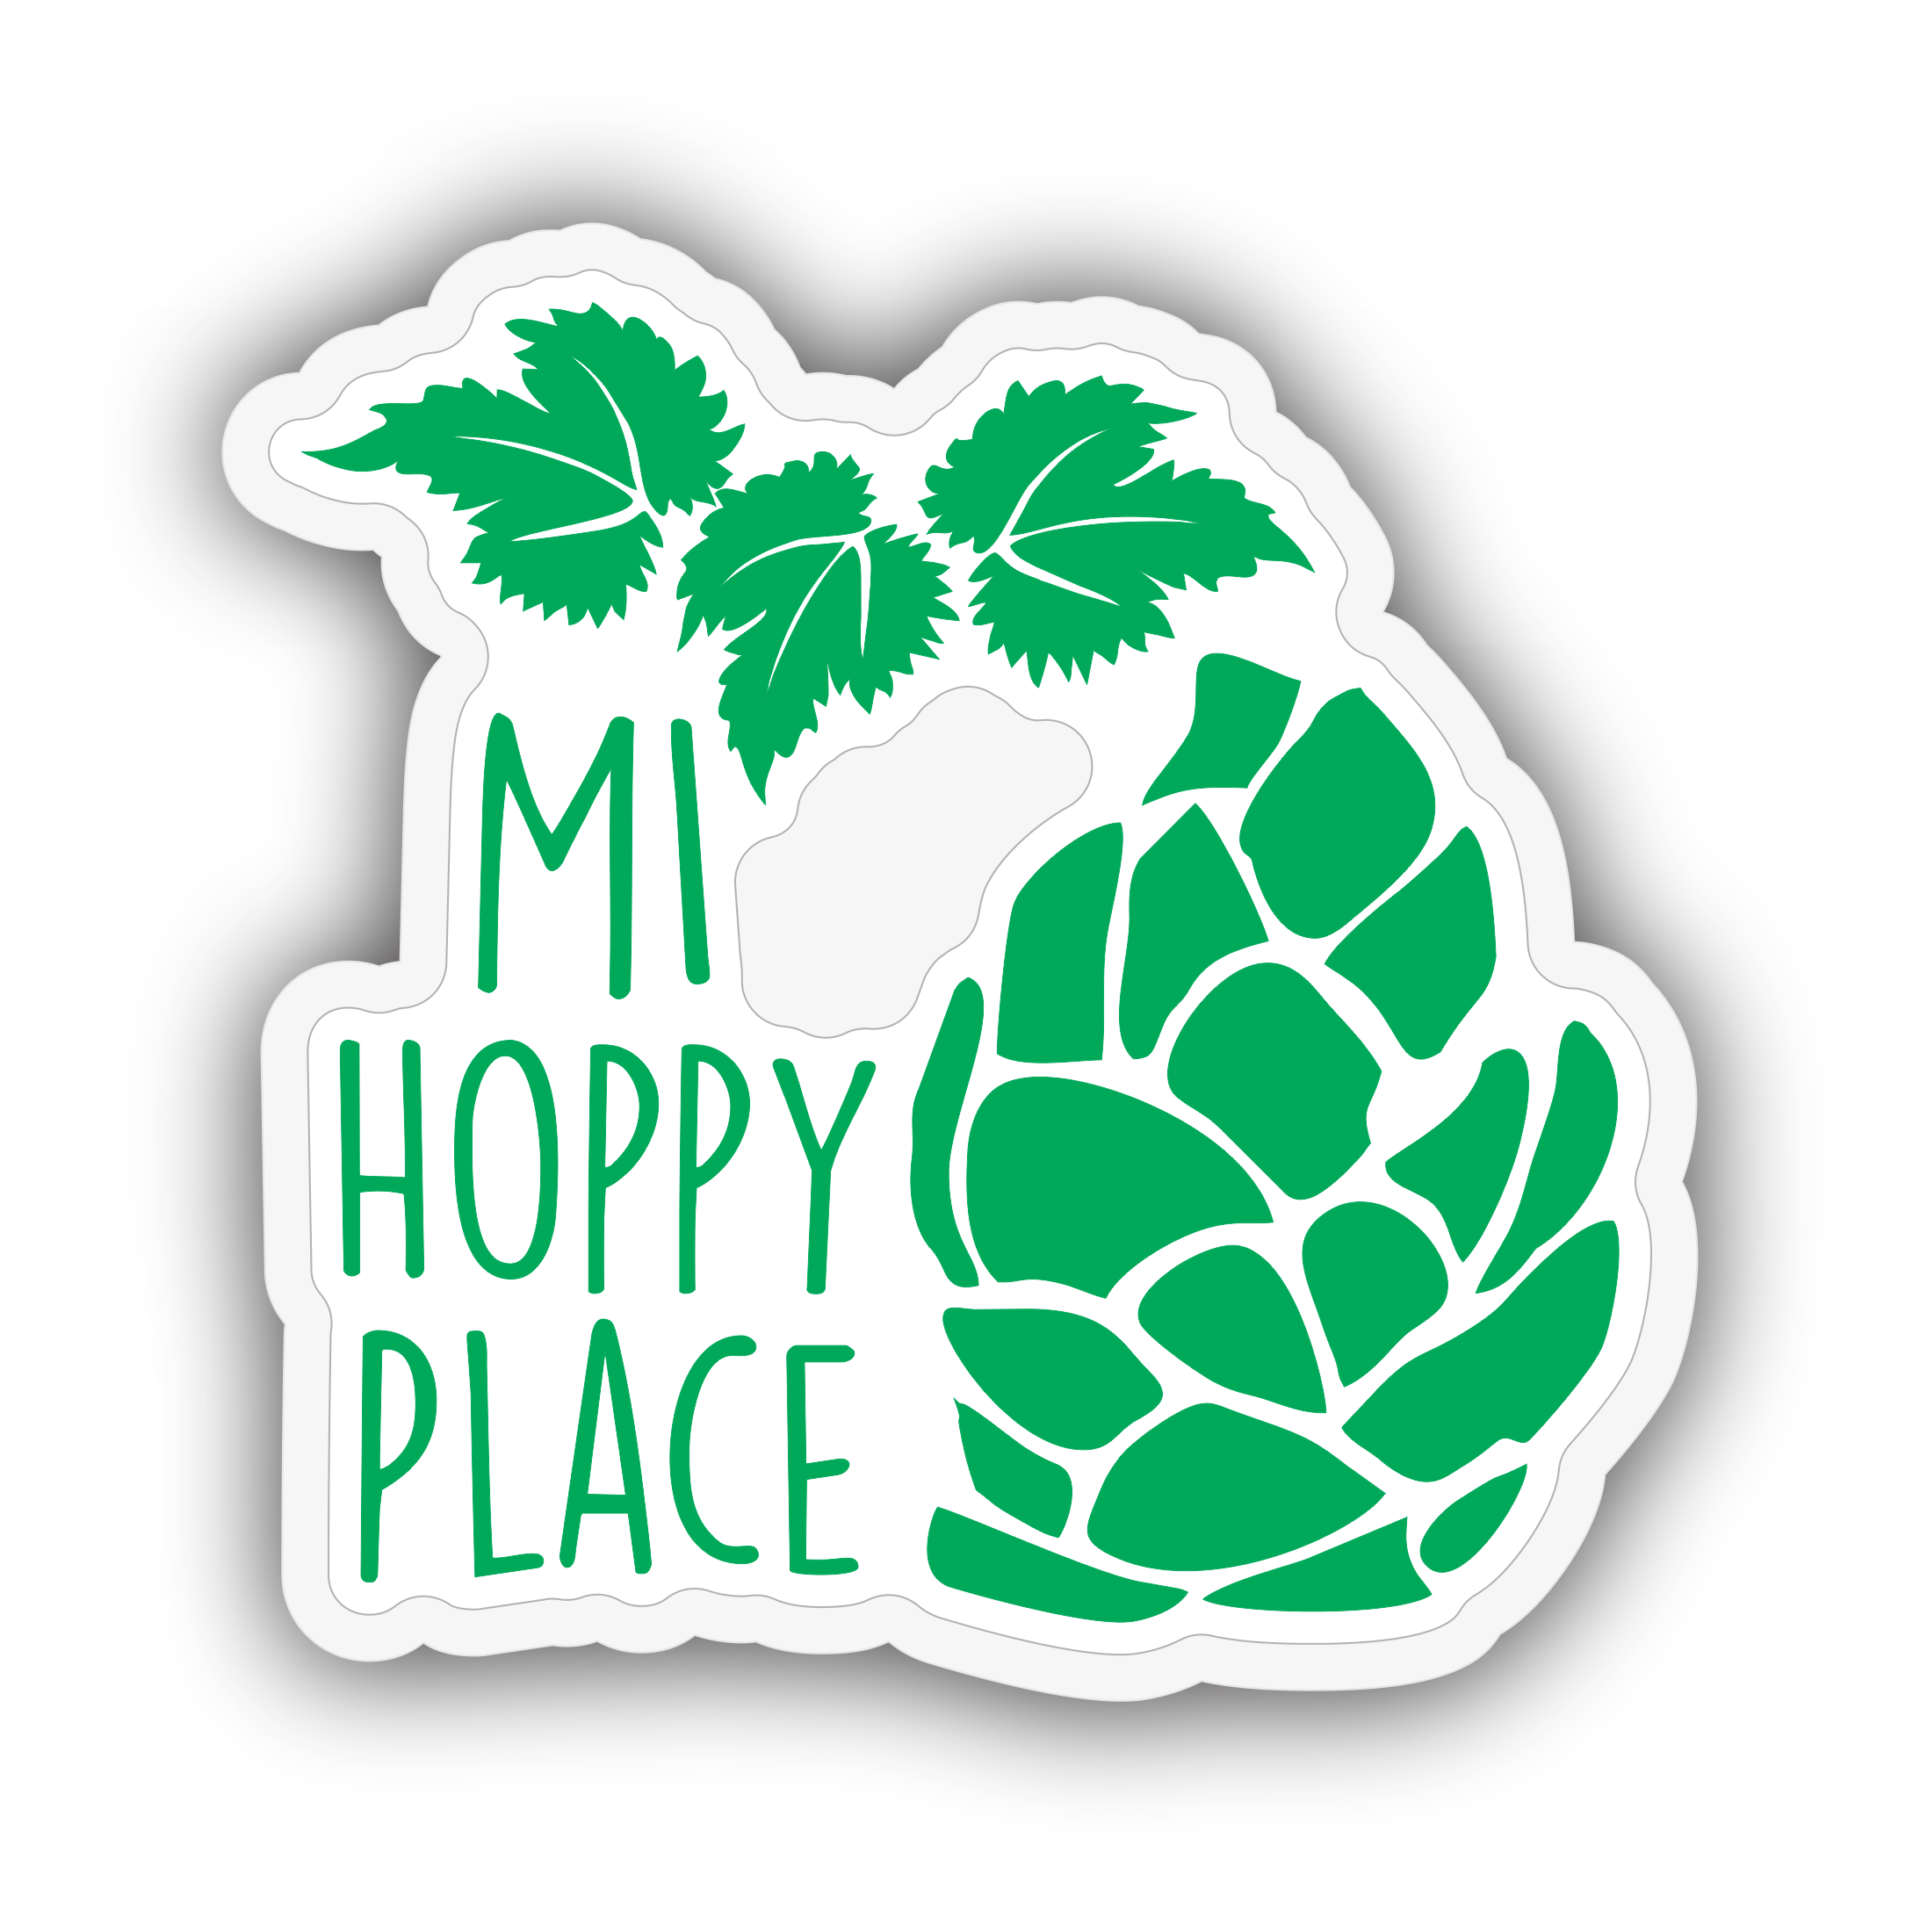 A sticker of plants in the color green with the text Mi hoppy place